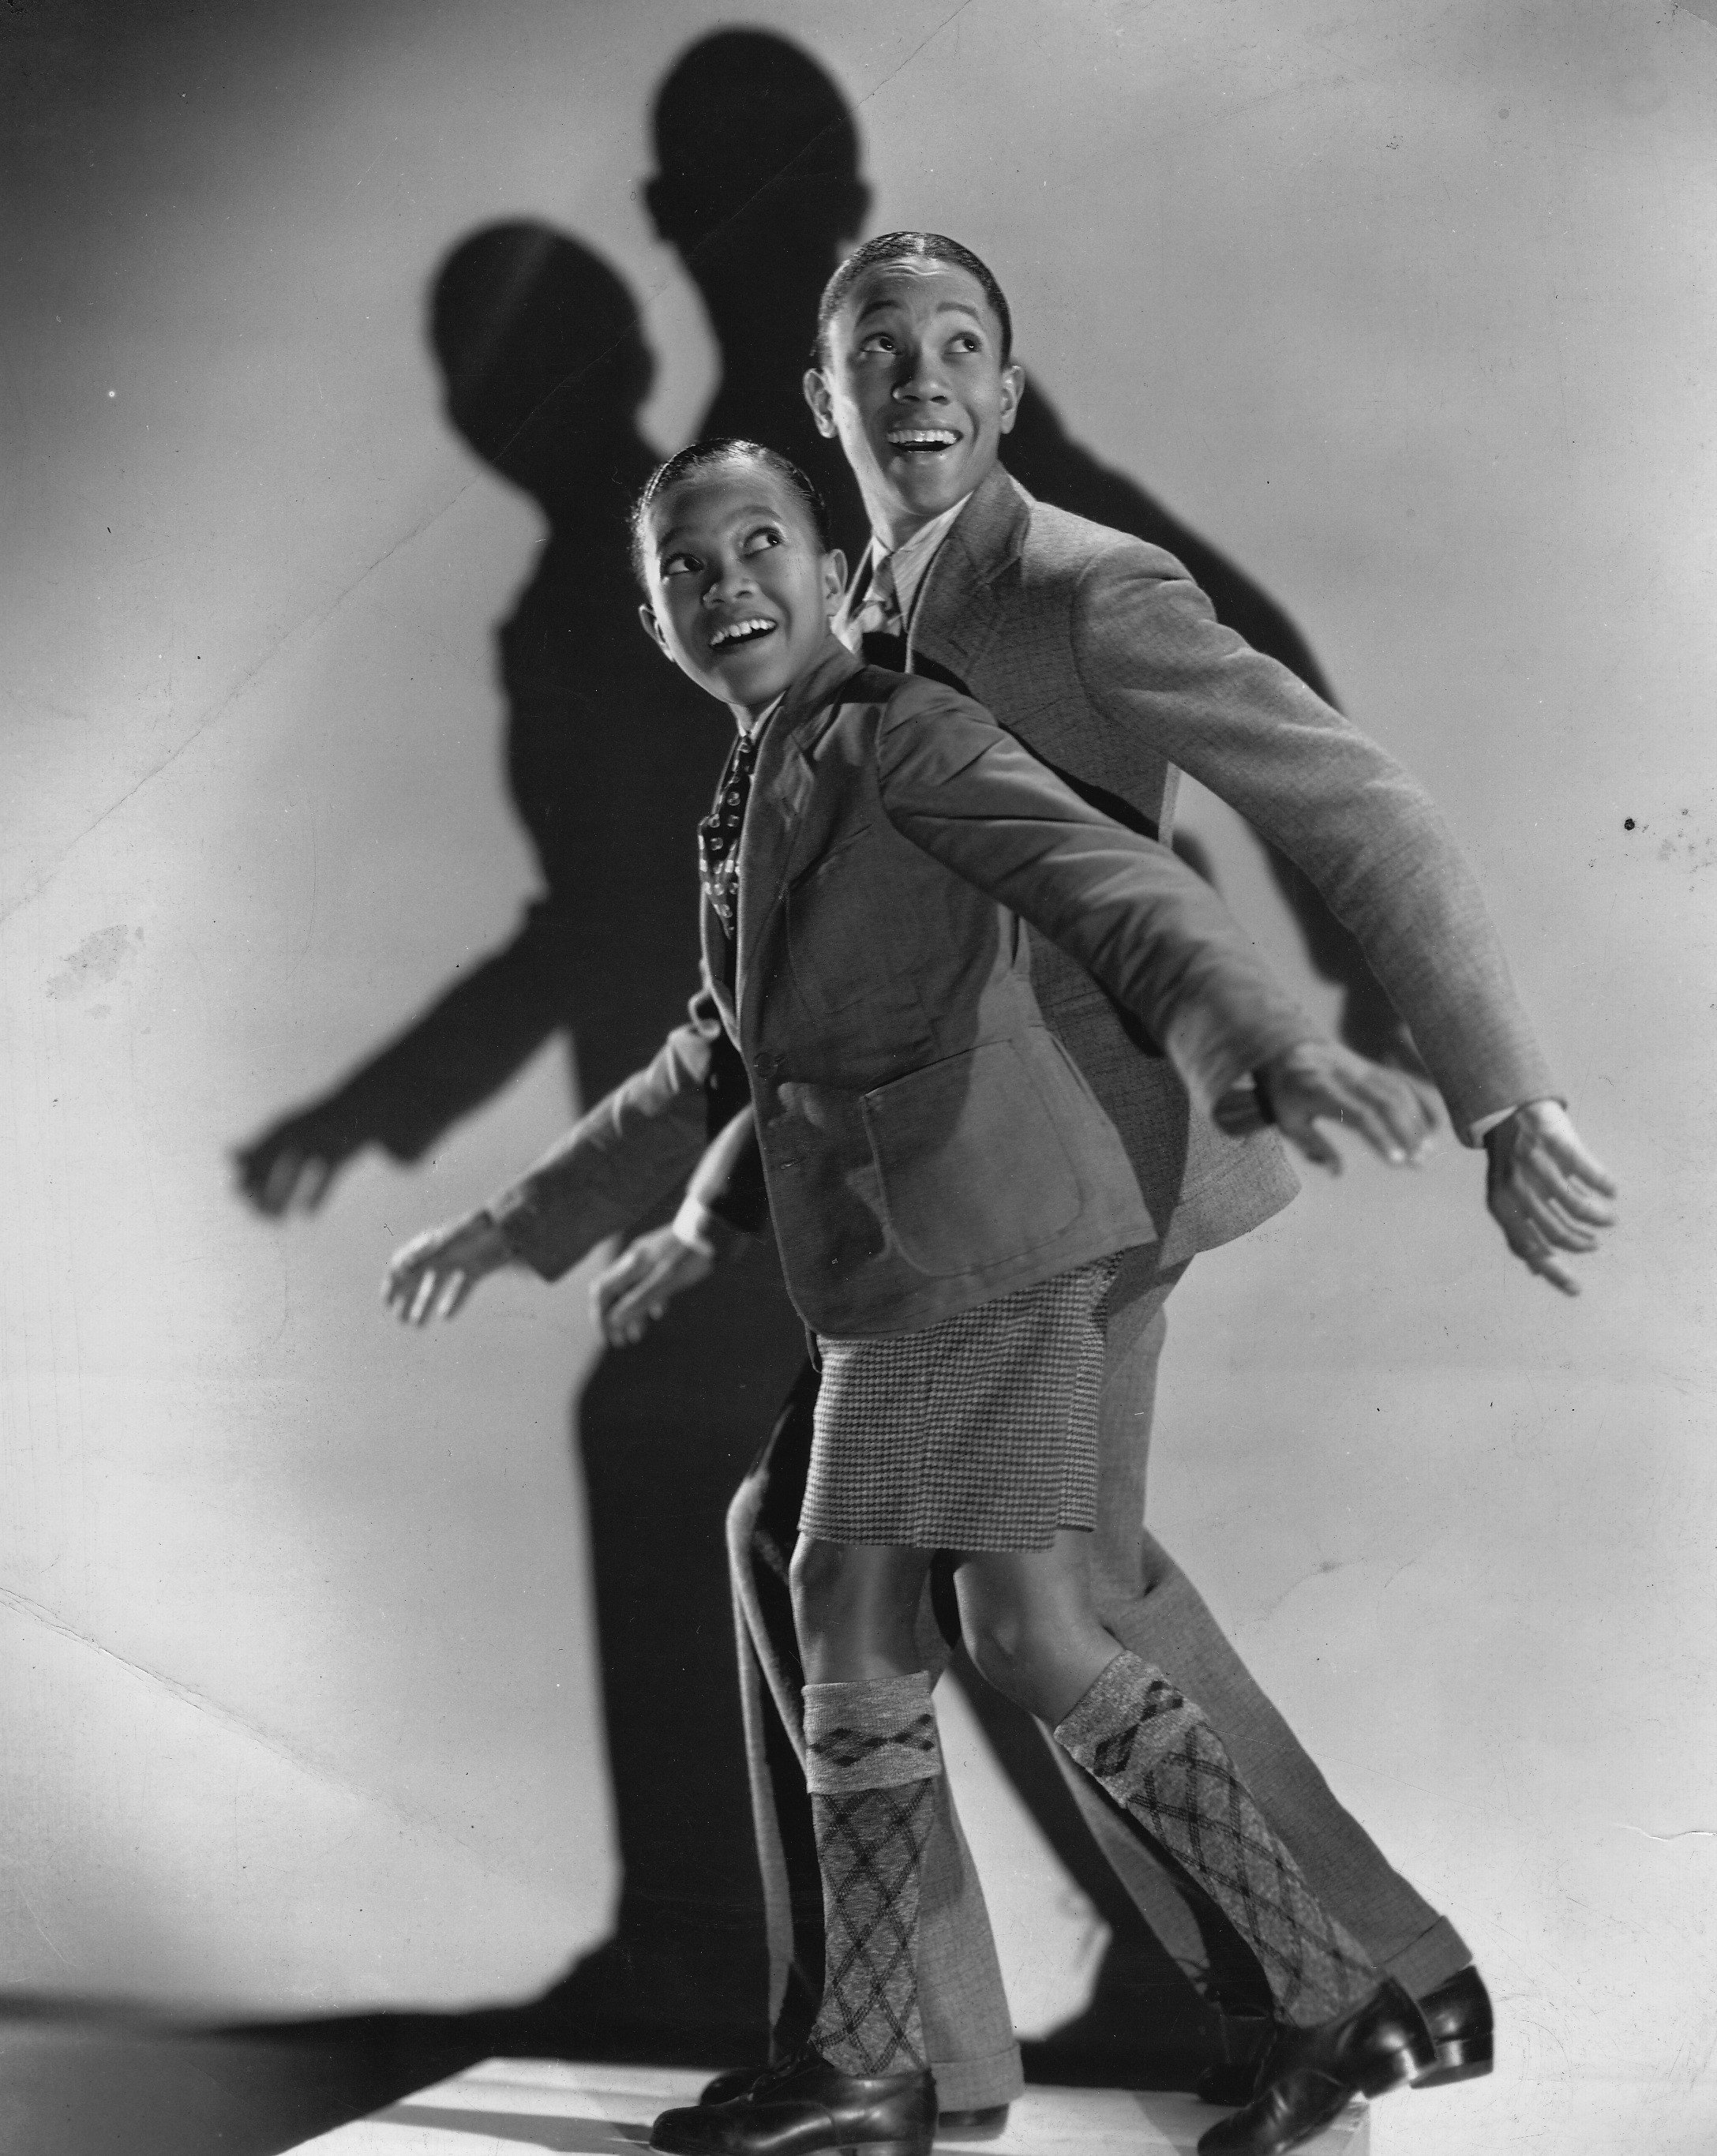 Dancers Harold Nicholas and Fayard Nicholas, The Nicholas Brothers, in a still from the film "Big Broadcast of 1935" | Photo: Getty Images